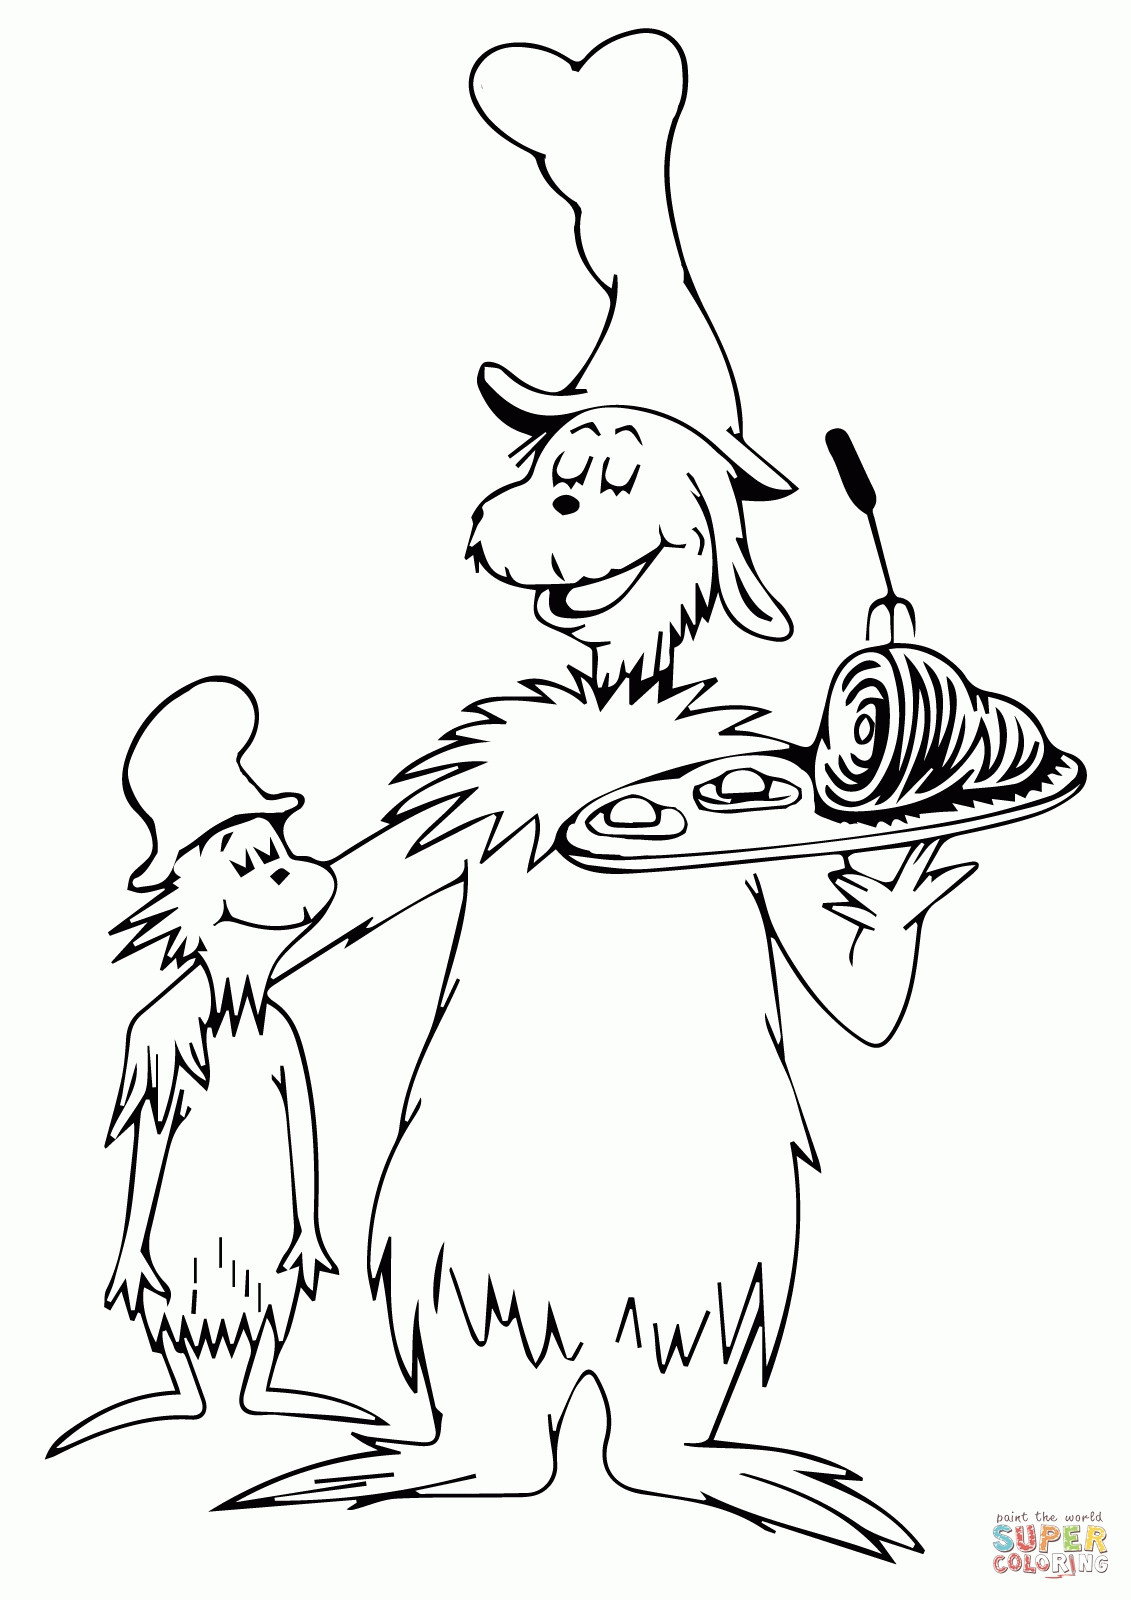 Dr Seuss Coloring Pages Printable
 Free Dr Seuss Coloring Pages Printable Coloring Home